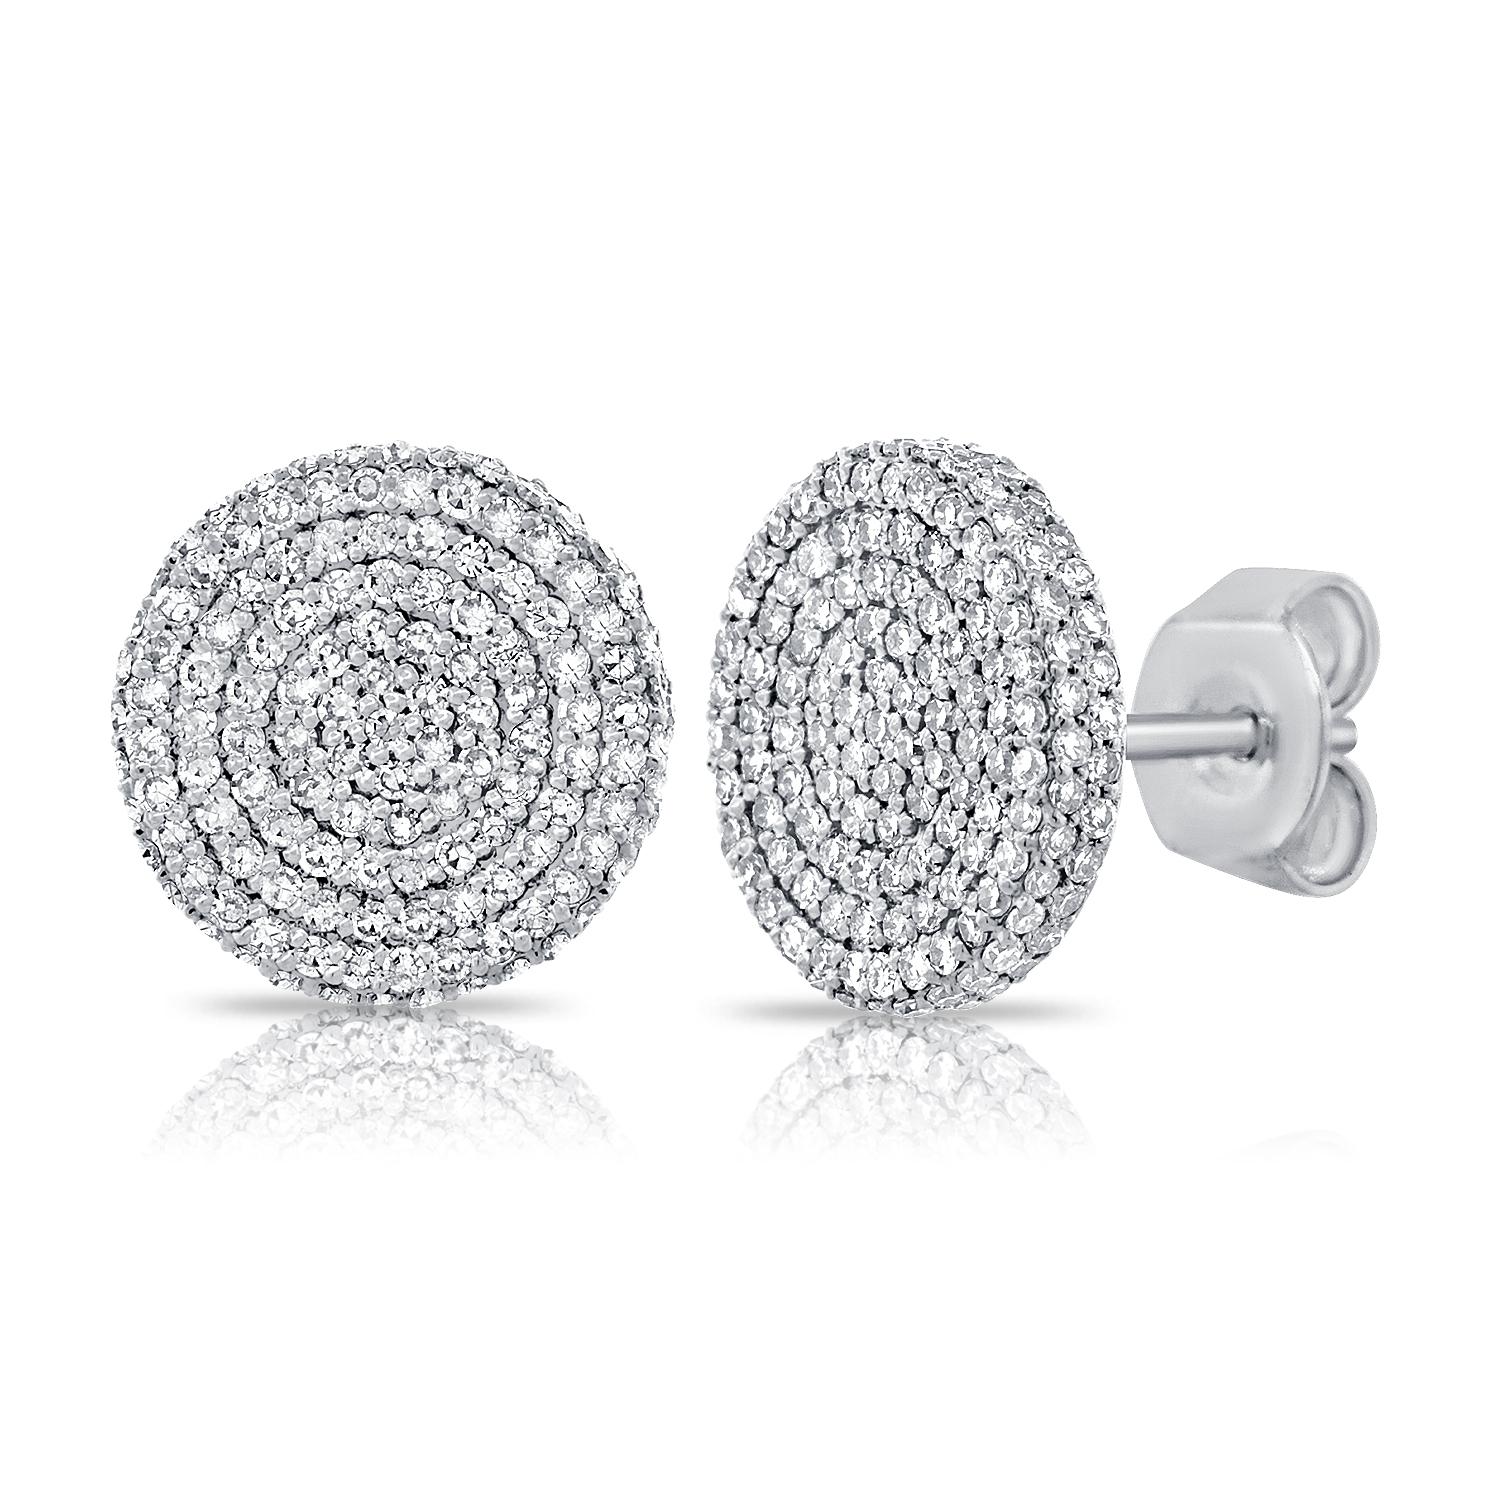 14k Gold & Diamond Large Disc Stud Earrings

Diamond Weight: 1.04 ct.
Diamond Count: 334
Gold Weight: 2.3 grams (approx.)
This piece is perfect for everyday wear and makes the perfect Gift! 

We certify that this is an authentic piece of Fine